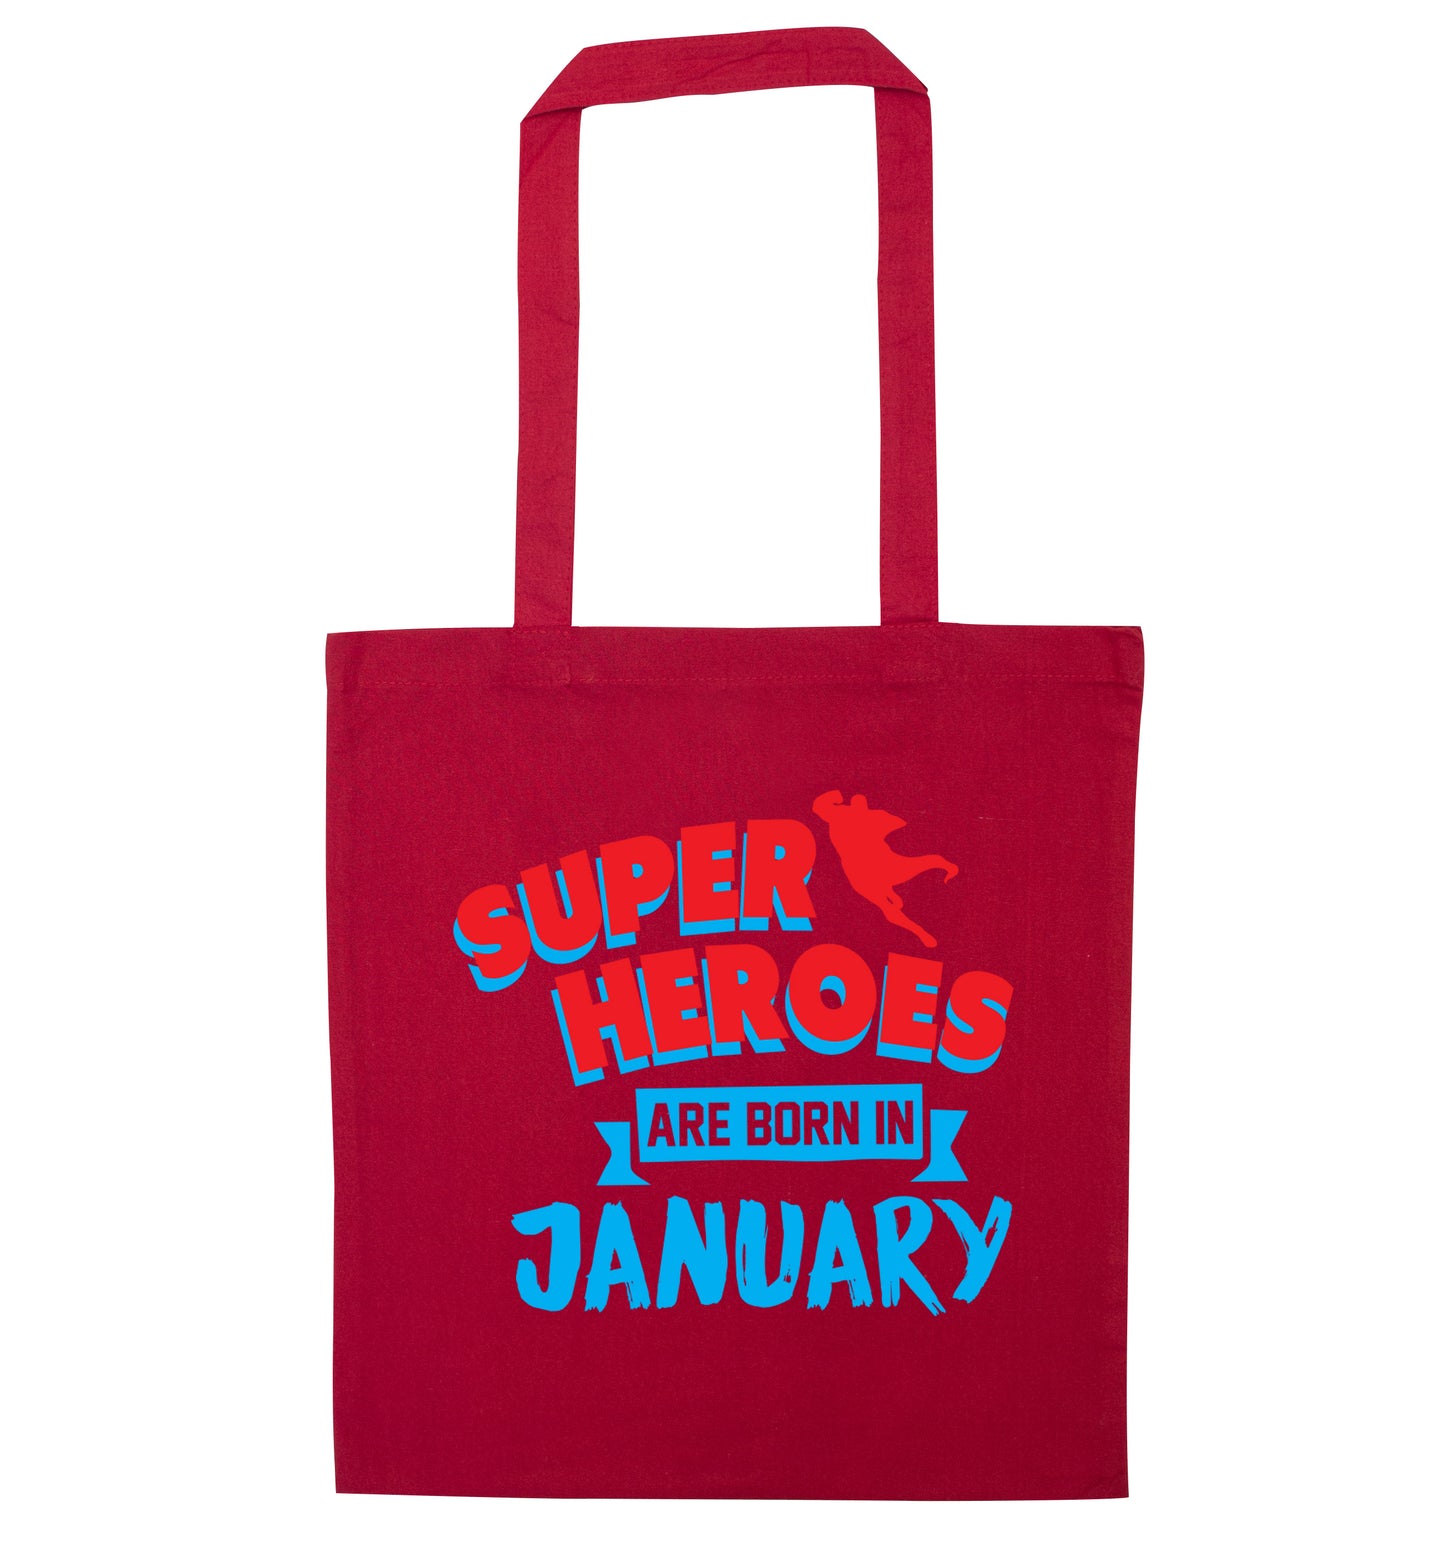 Superheros are born in January red tote bag